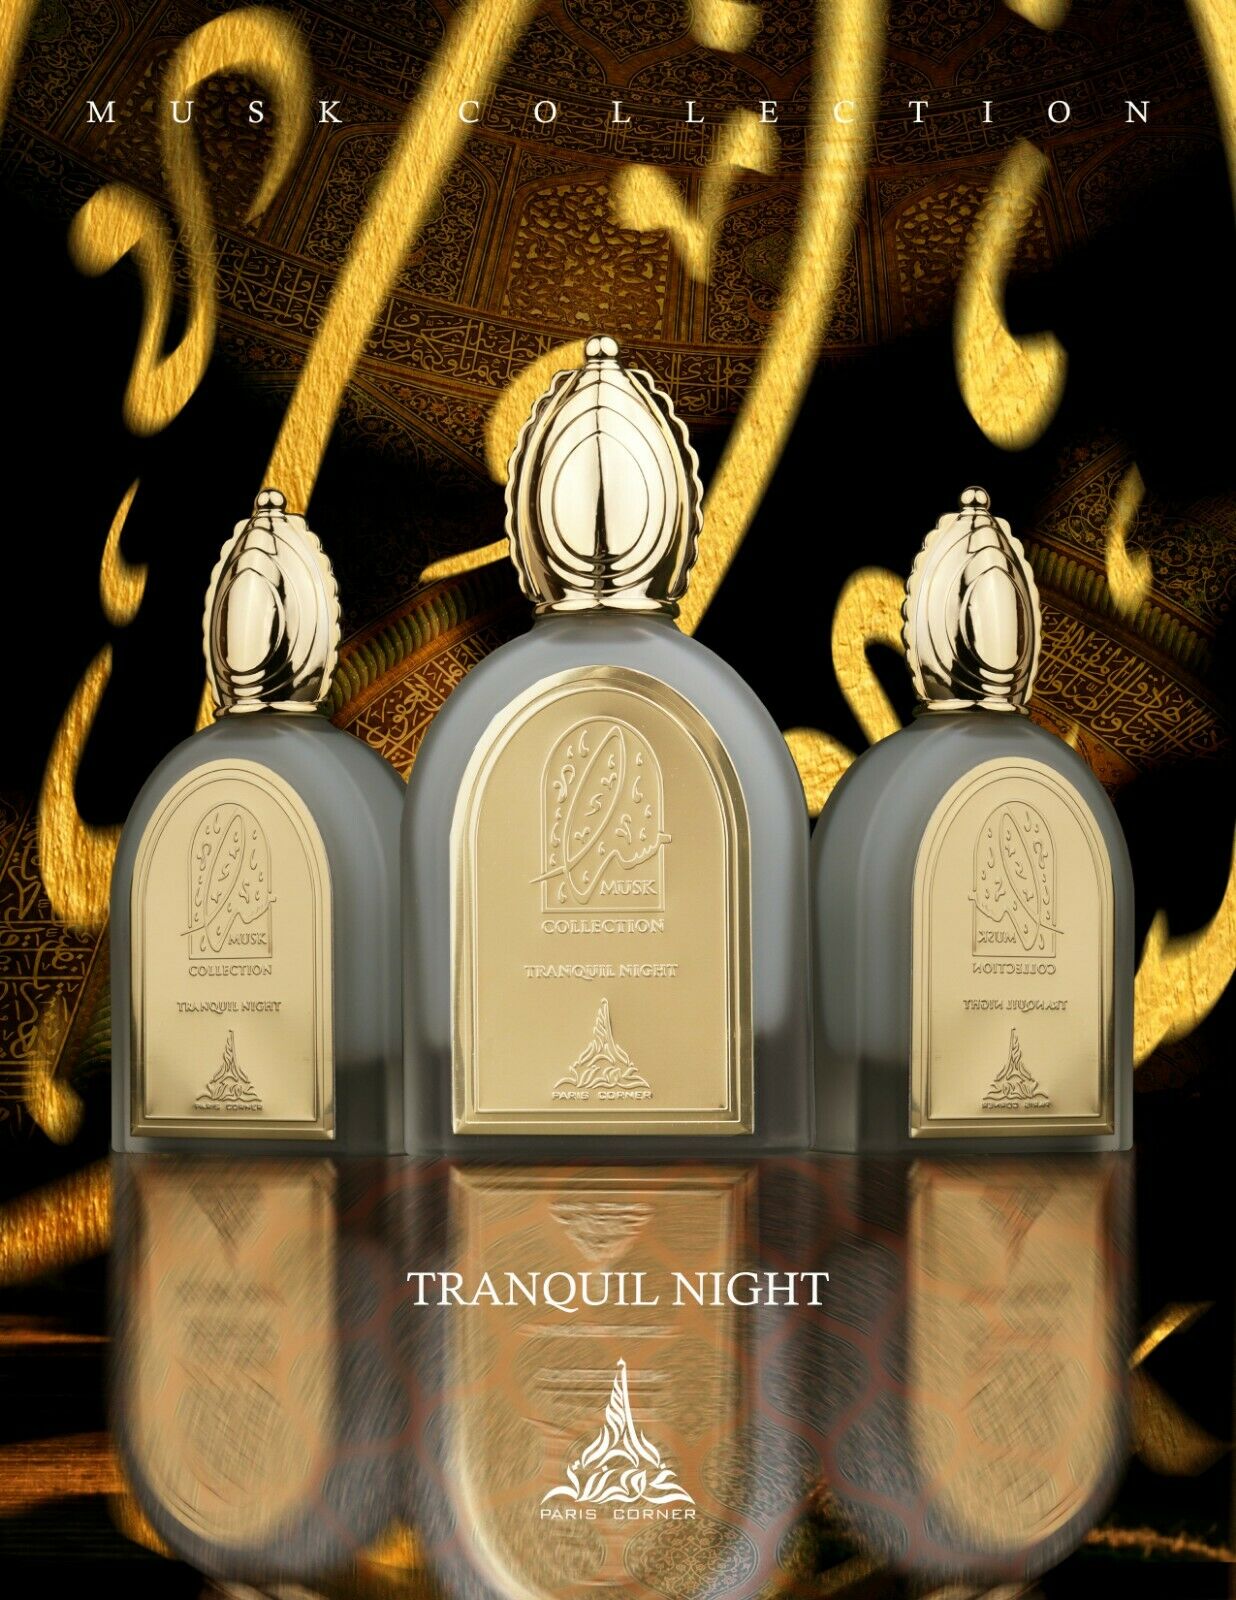 TRANQUIL NIGHT -MUSK COLLECTION